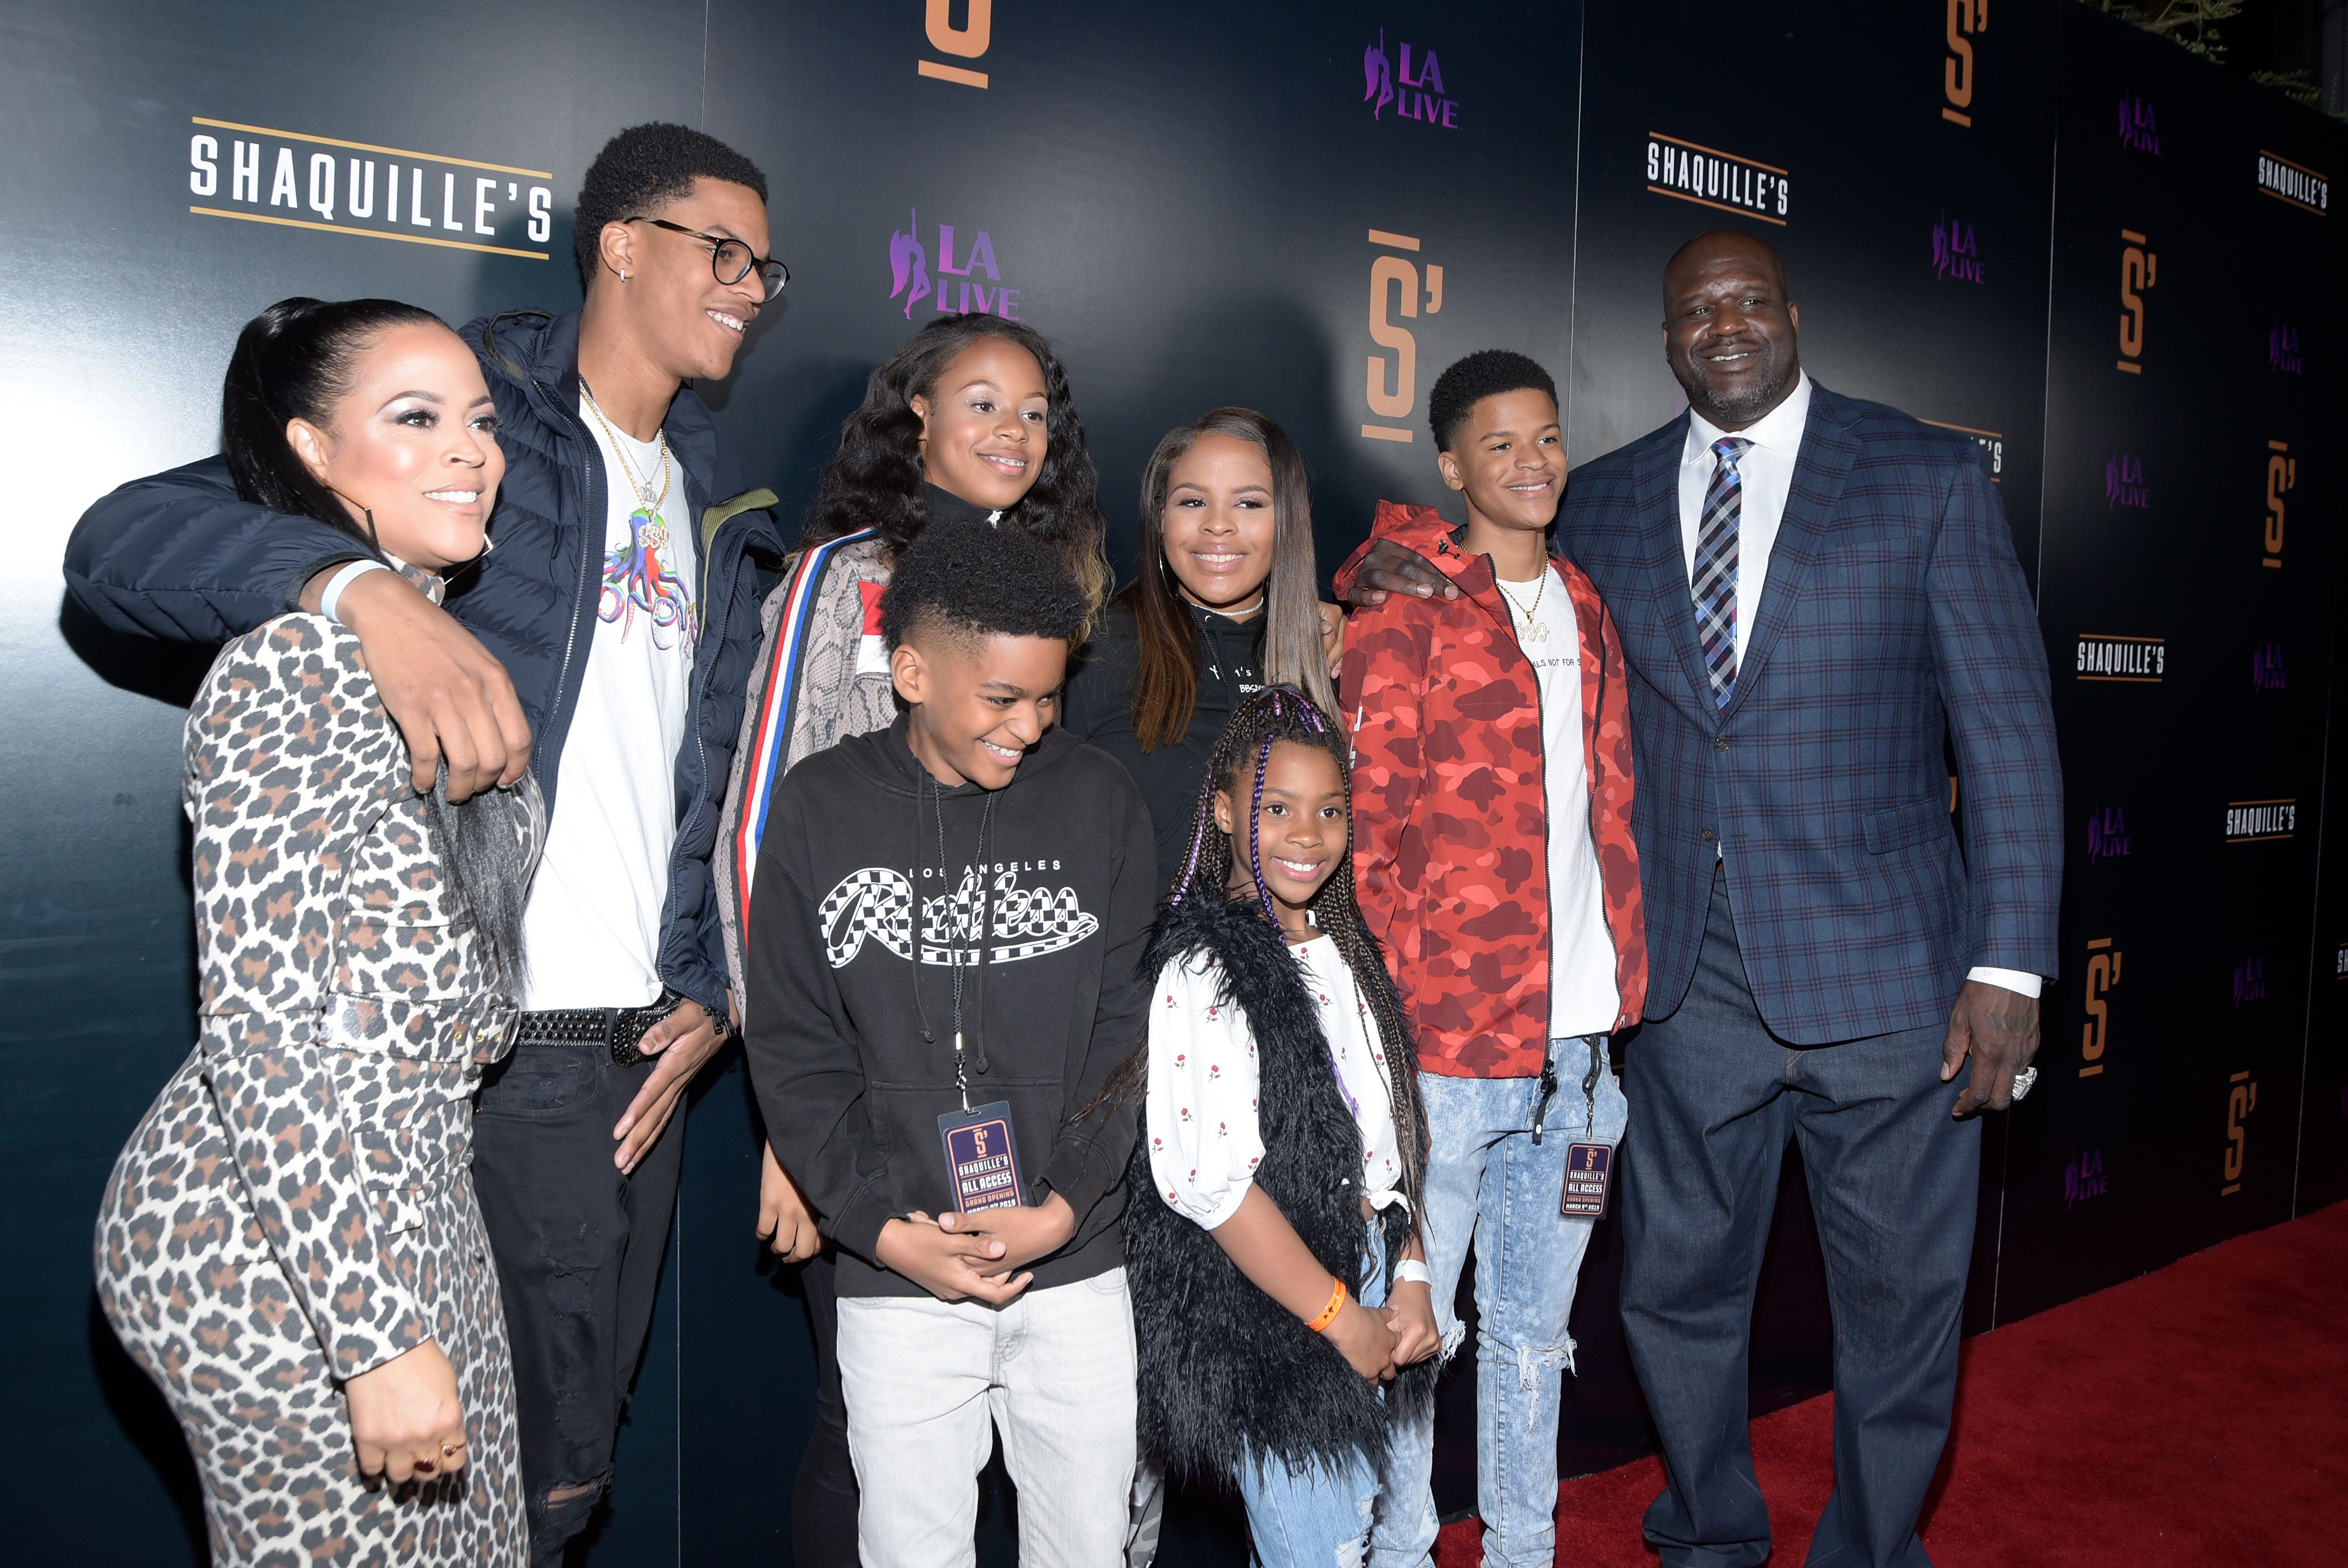 Shaunie O'Neal and Shaquille O'Neal and their family pose on the red carpet at the opening of Shaquille's At L.A. Live on March 09, 2019, in Los Angeles, California | Source: Michael Tullberg/Getty Images